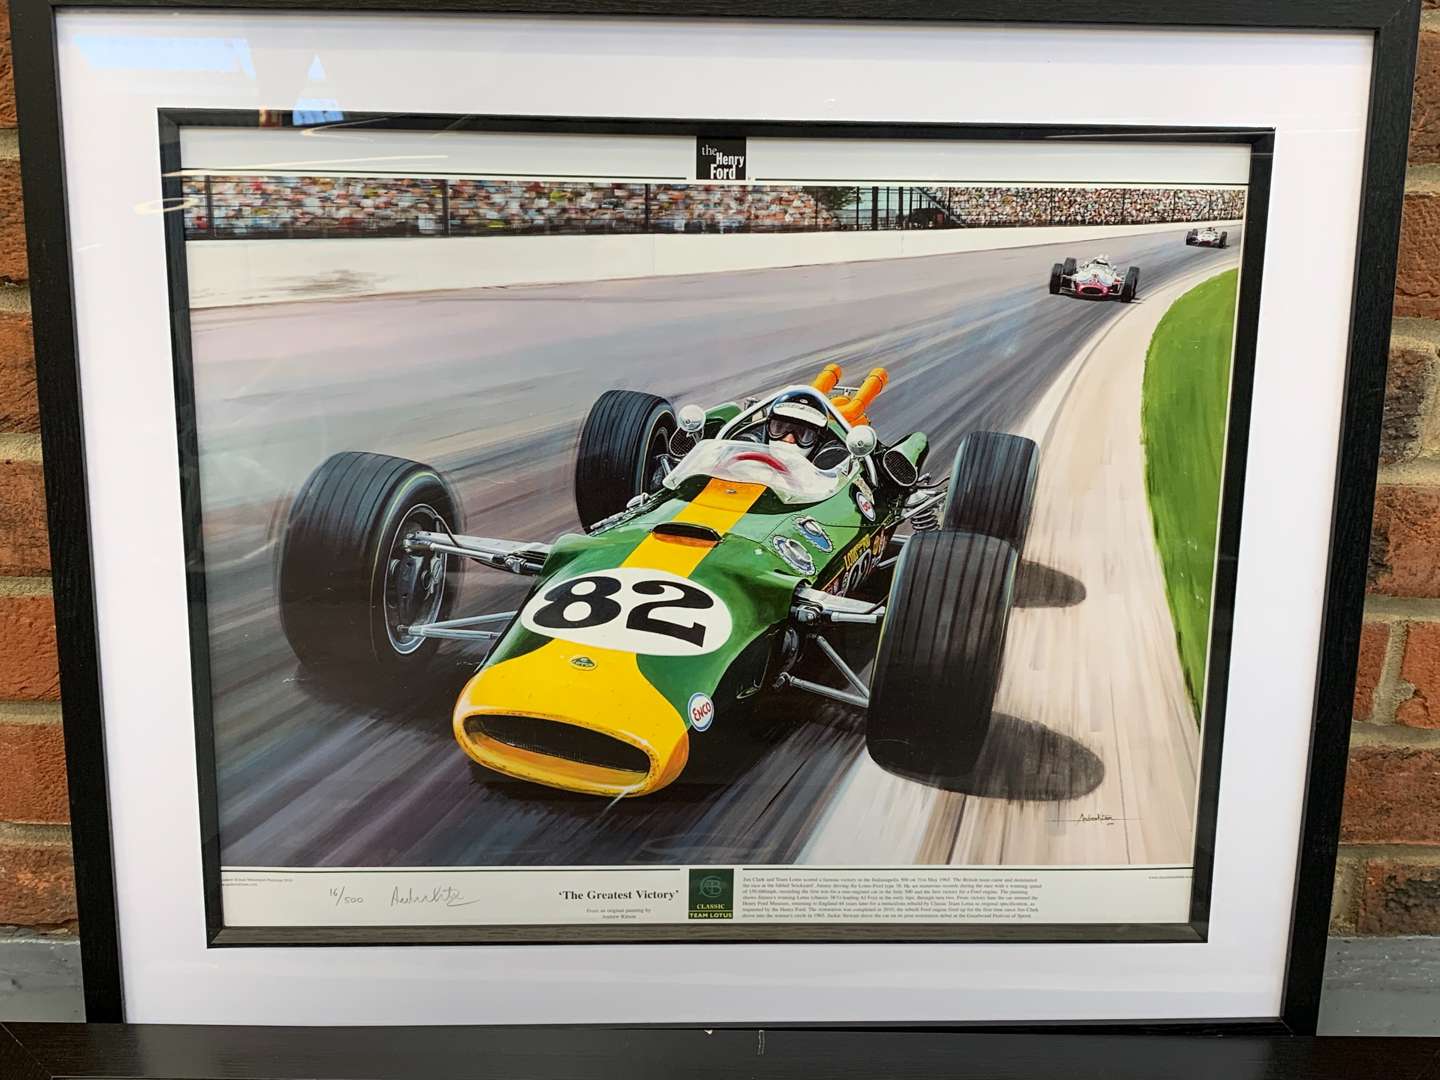 <p>Two Framed Prints, “Jim Clark A Life at Team Lotus” and “The Greatest Victory” (Both Signed)</p>